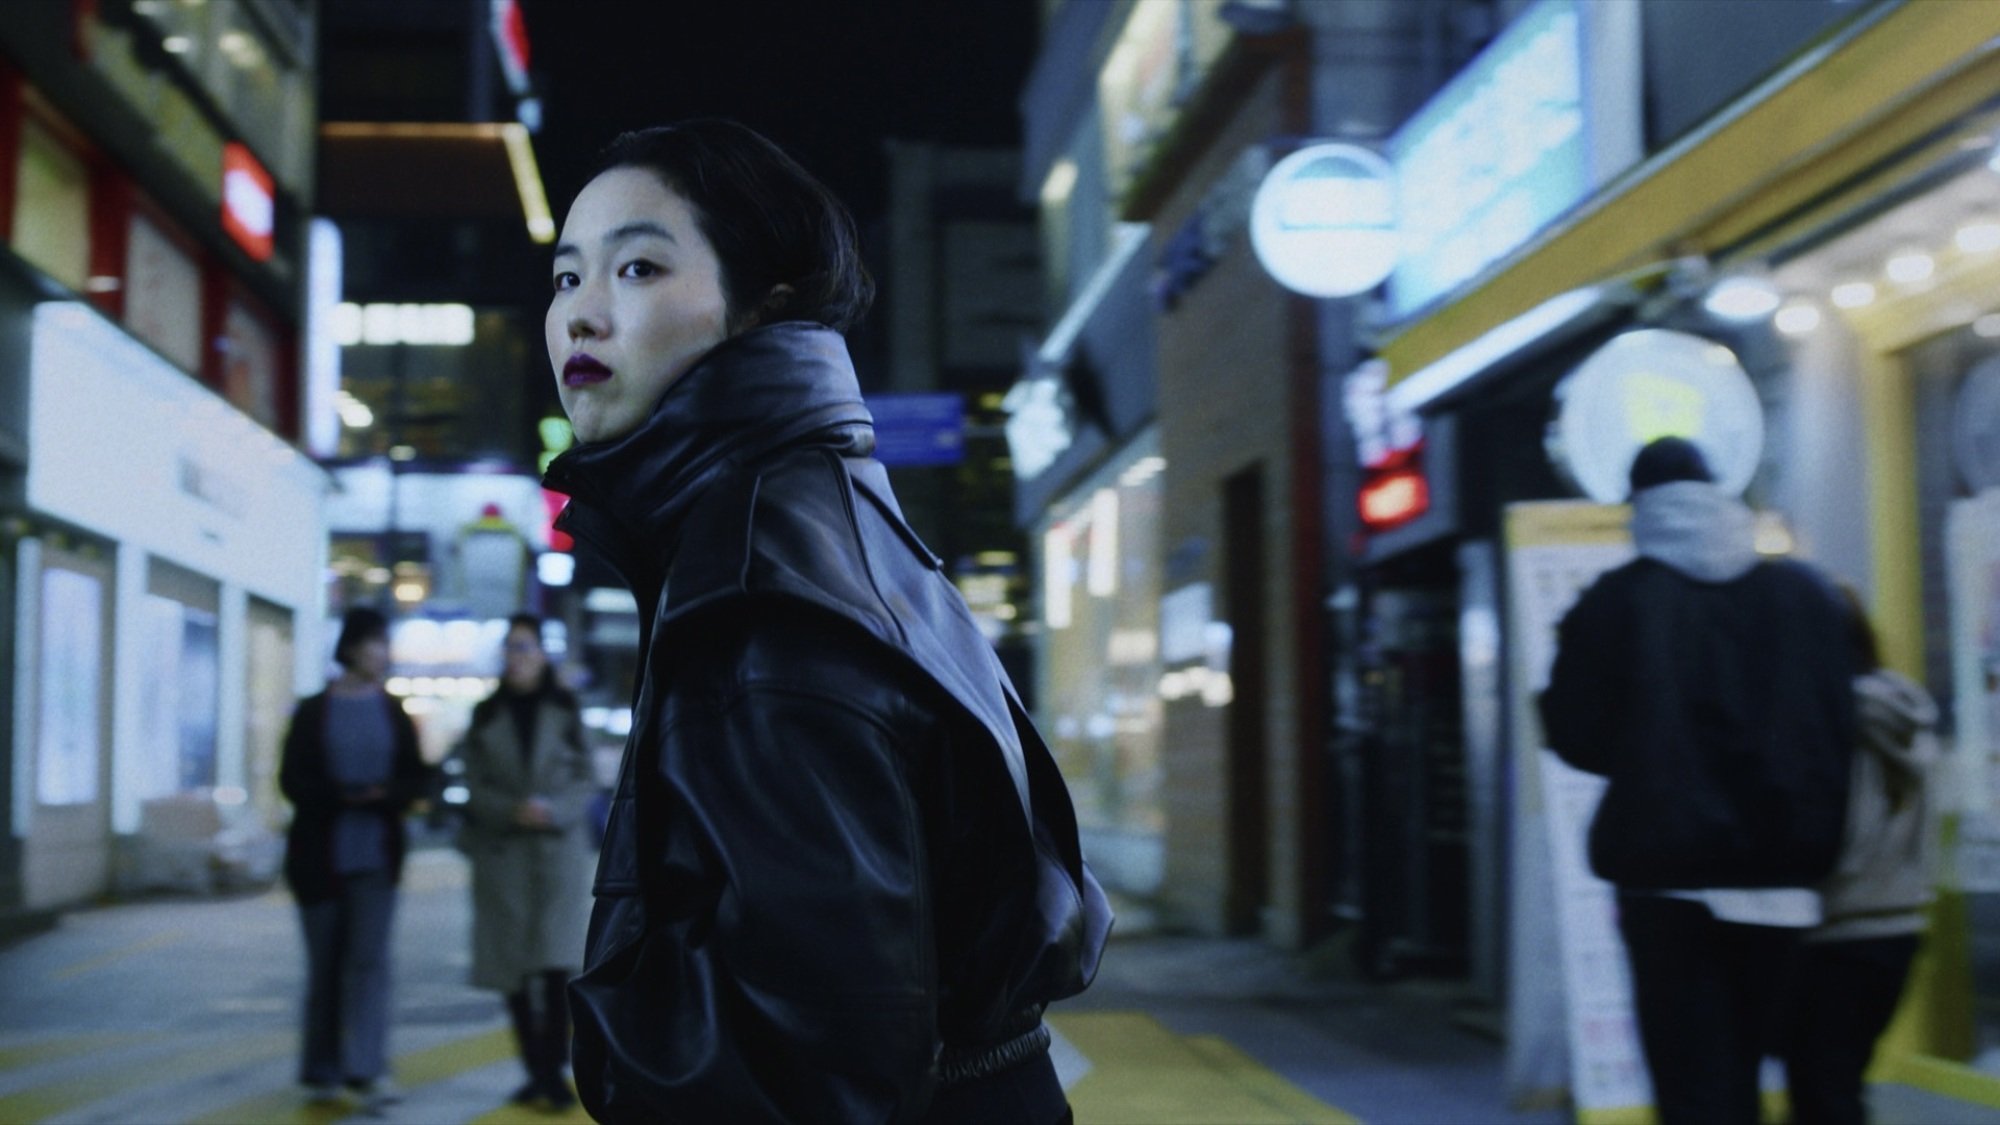 A woman in a high-collared black coat and lipstick on a Seoul street at night.